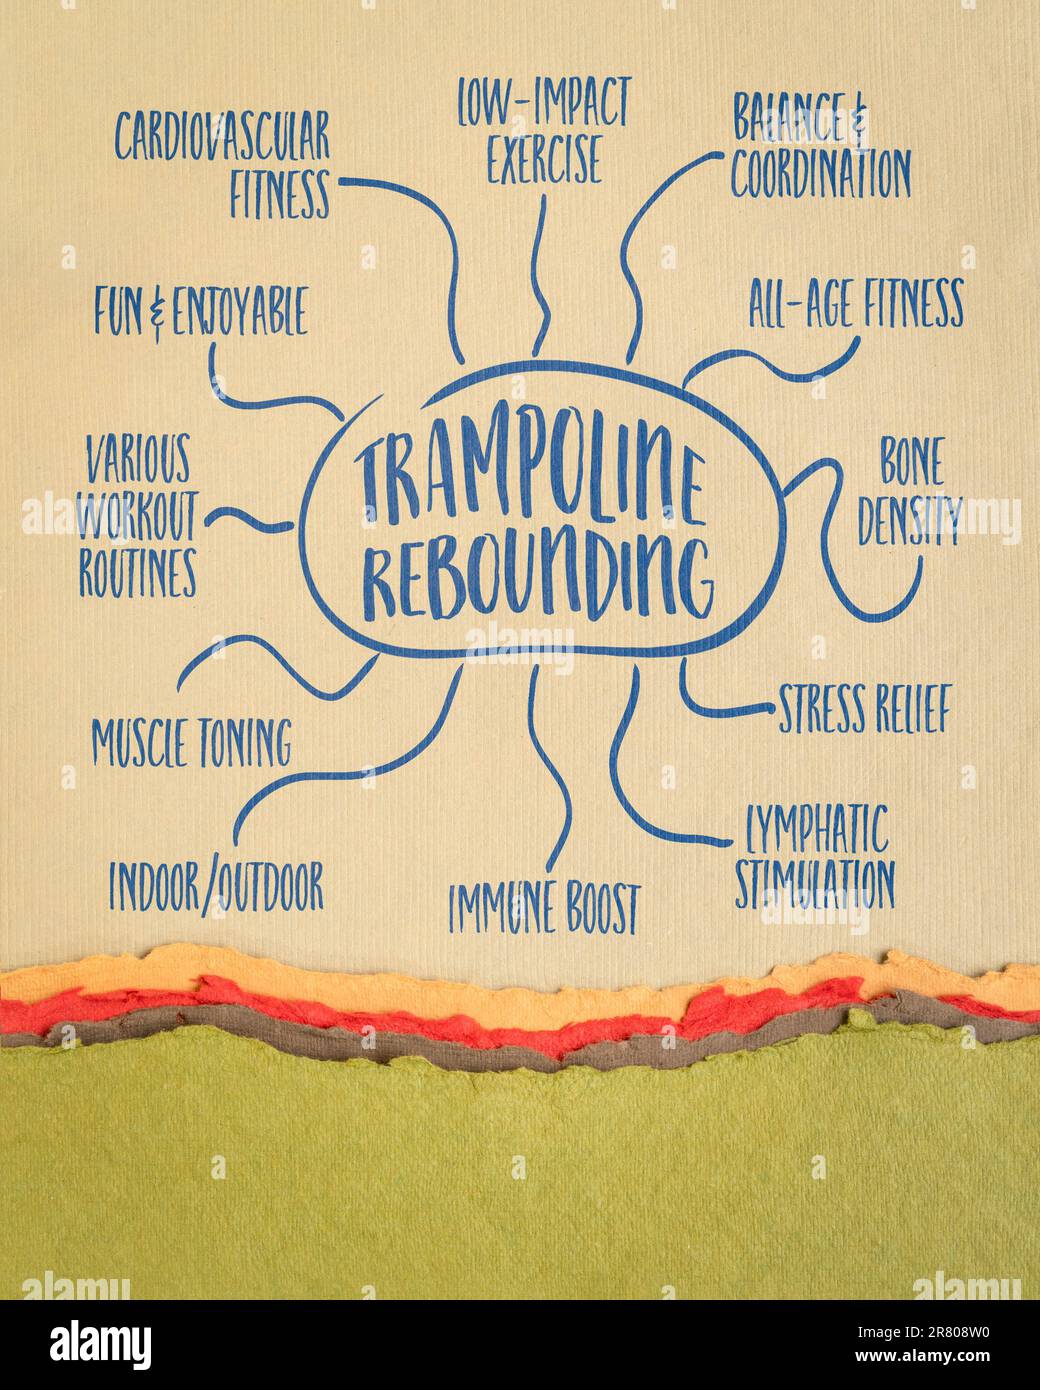 health and fitness benefits of mini trampoline rebounding - mind map sketch on art paper Stock Photo